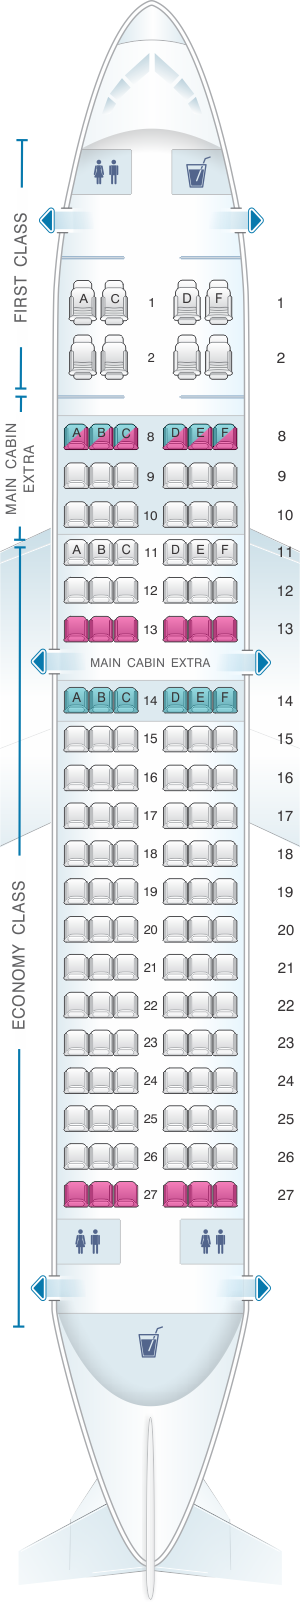 boeing 757 american airlines seating chart